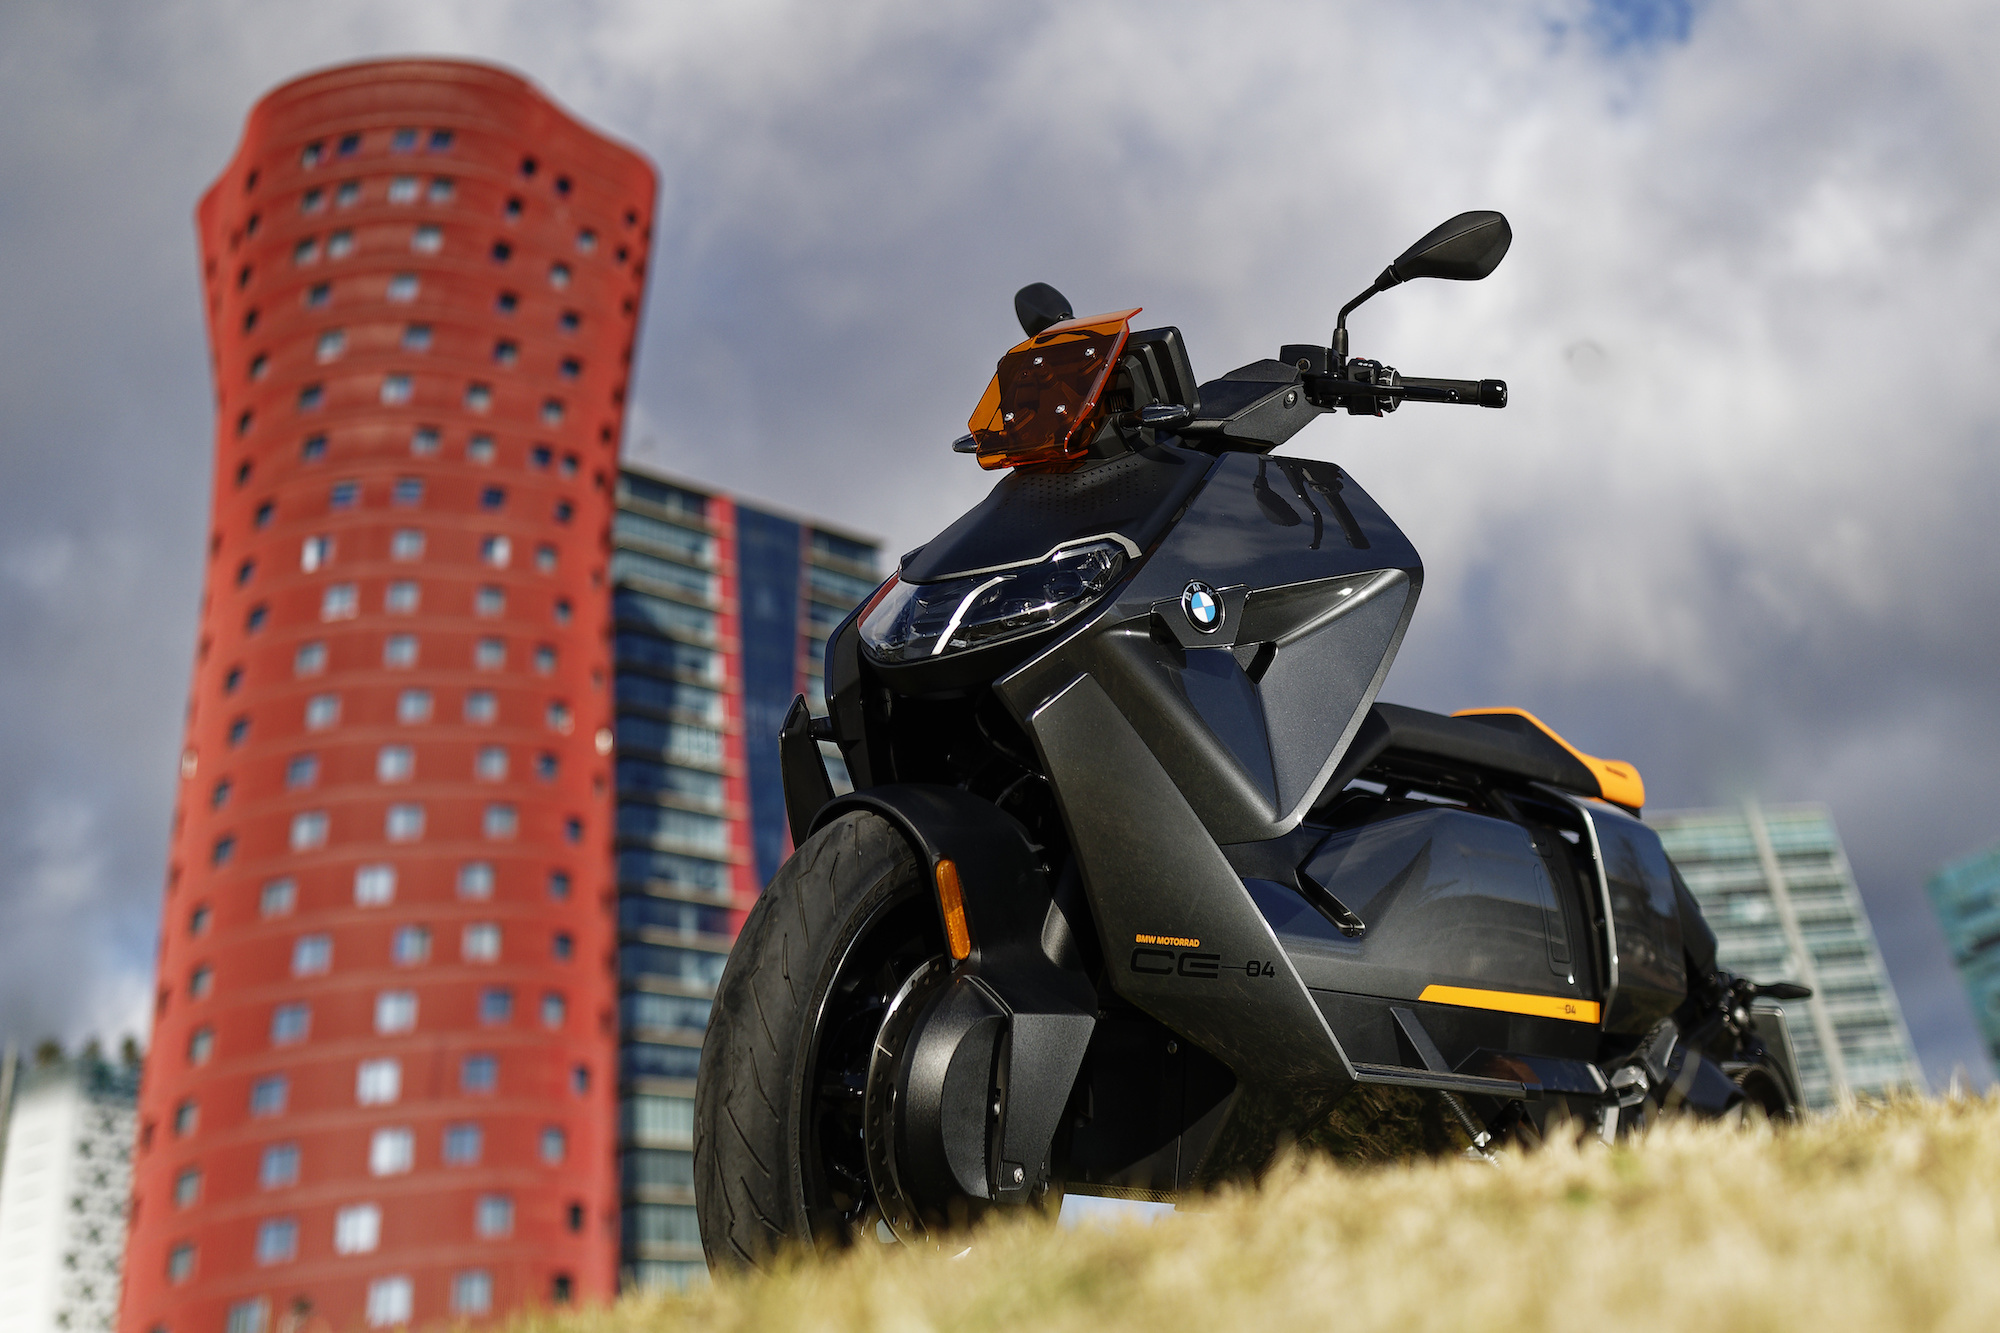 BMW CE 04, Auto review, Electric scooter, Gaming deputy, 2000x1340 HD Desktop